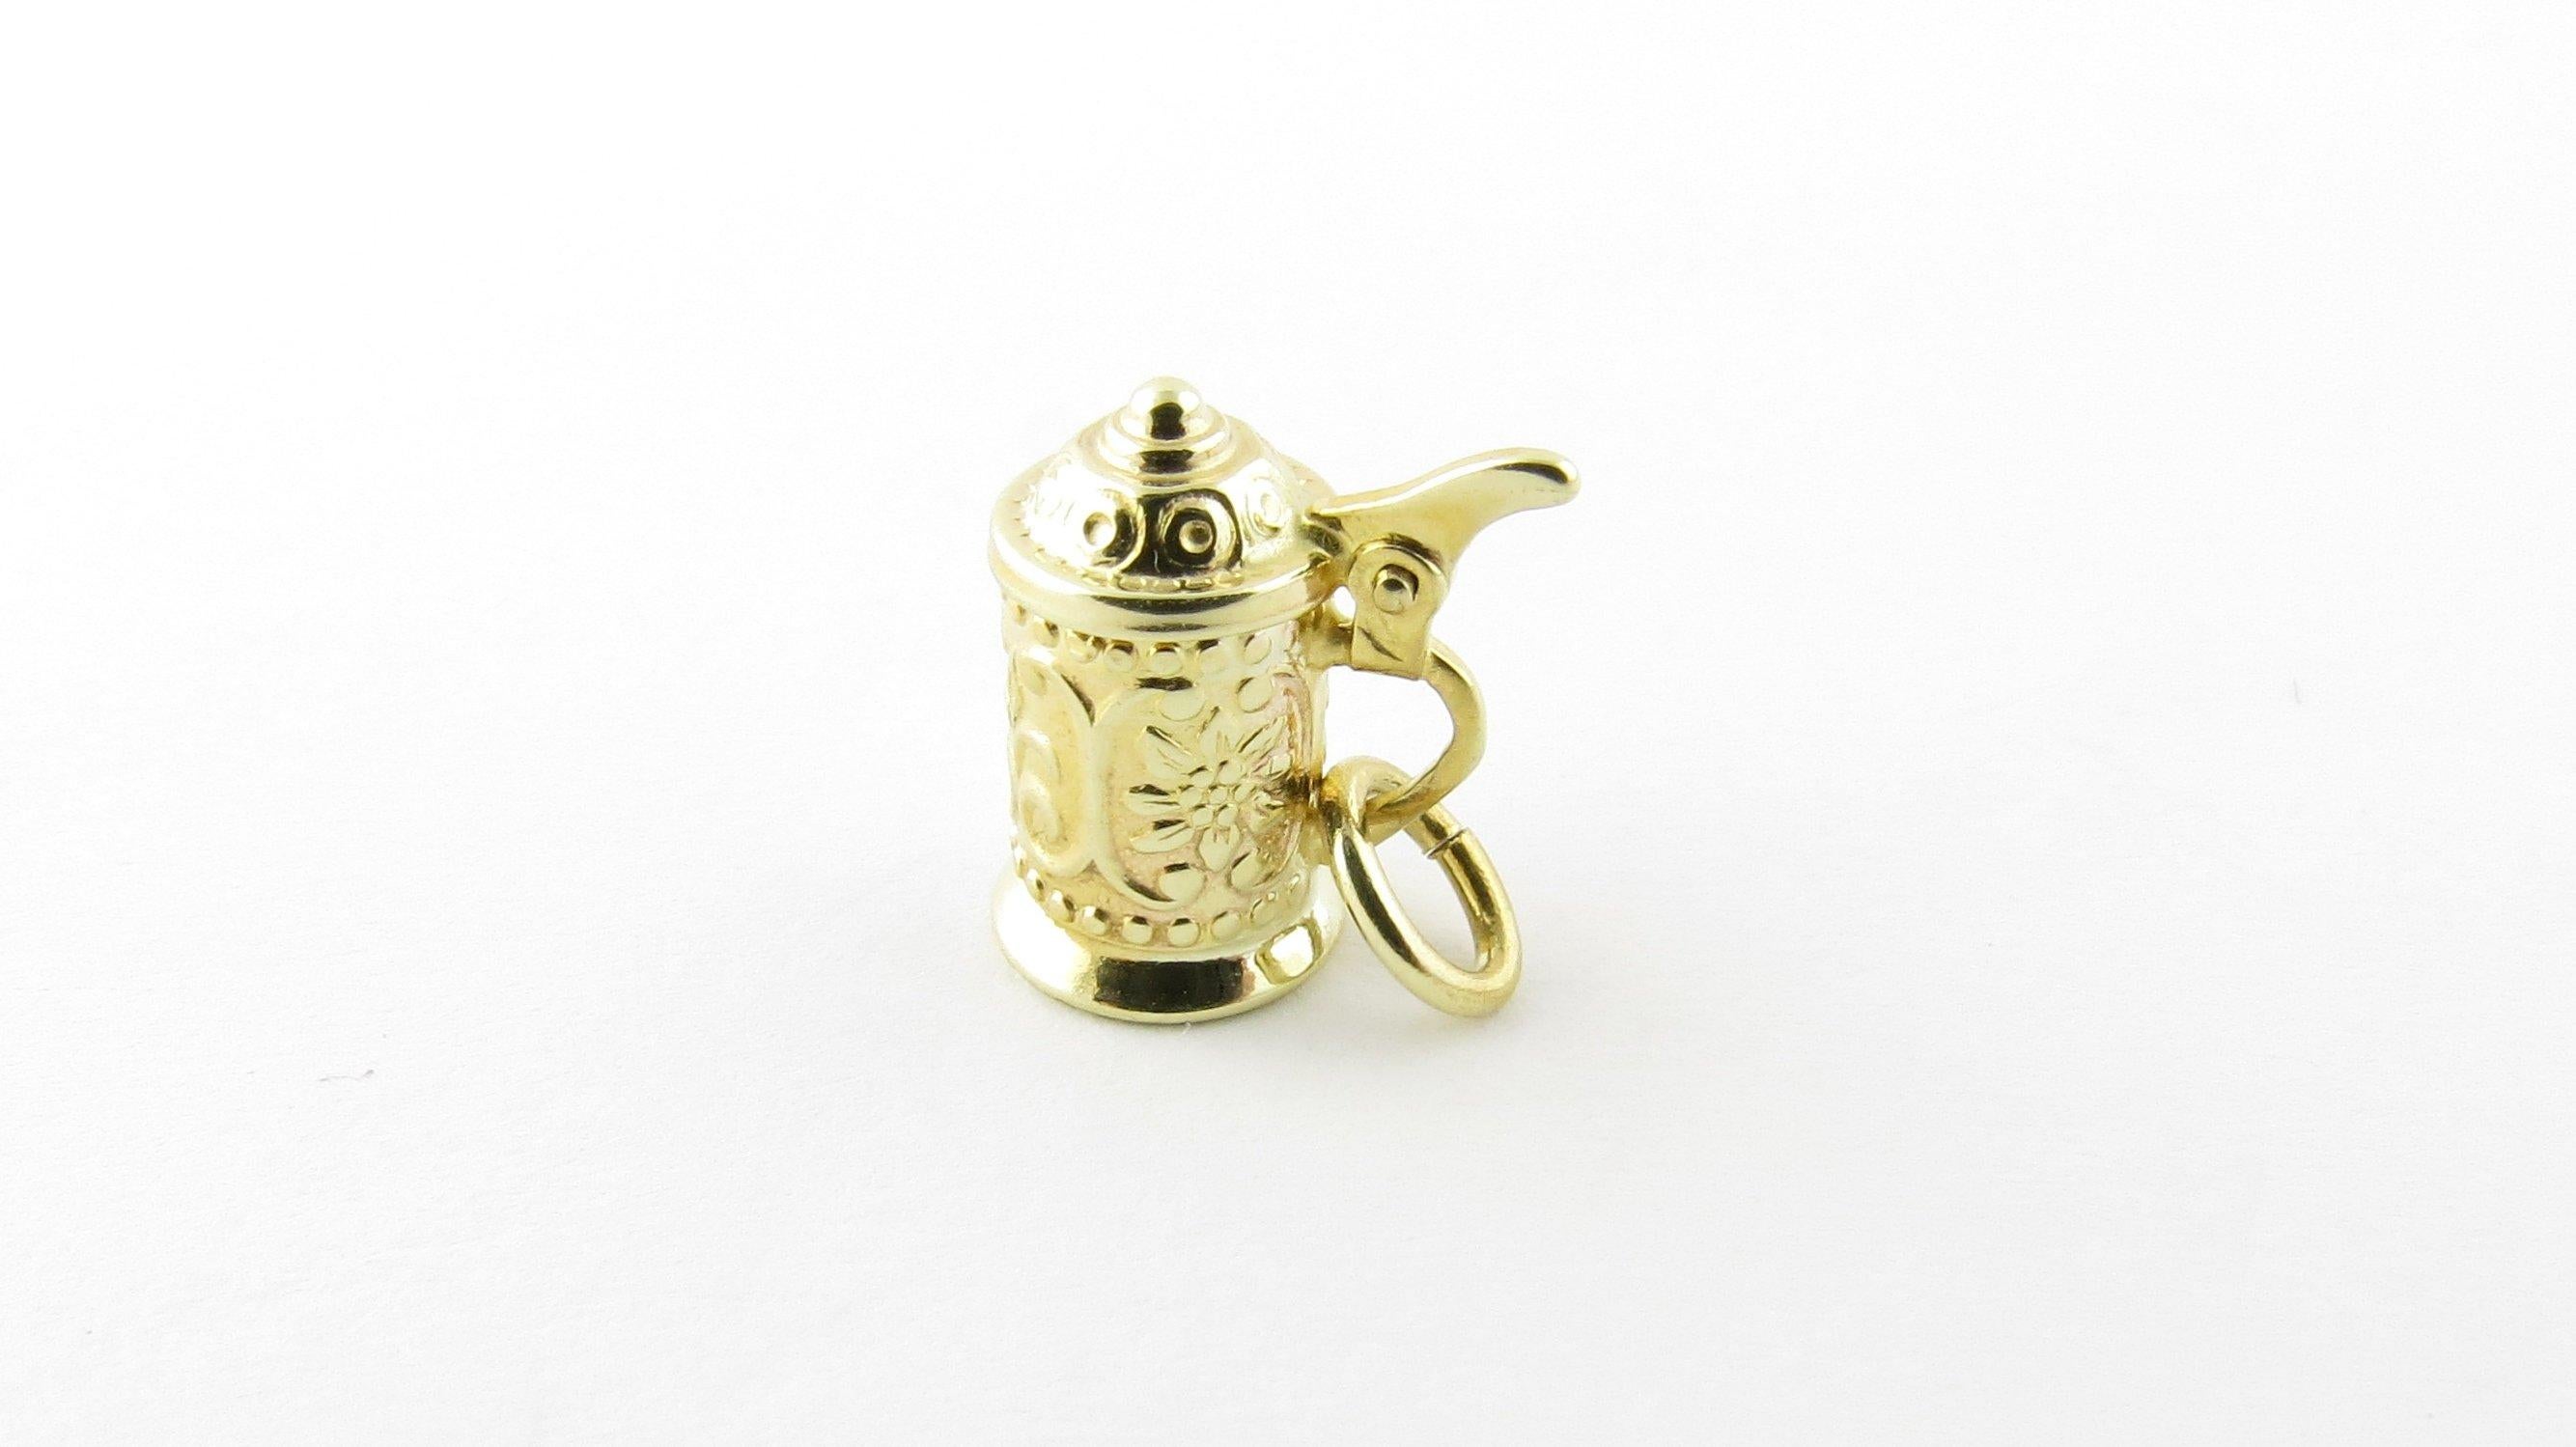 Vintage 8 Karat Yellow Gold Articulated Beer Stein Charm-Cheers! This 3D articulated charm features a miniature beer stein with hinged lid meticulously detailed in 8K yellow gold.
Size: 12 mm x 11 mm (actual charm) Weight: 0.3 dwt. / 0.6 gr.